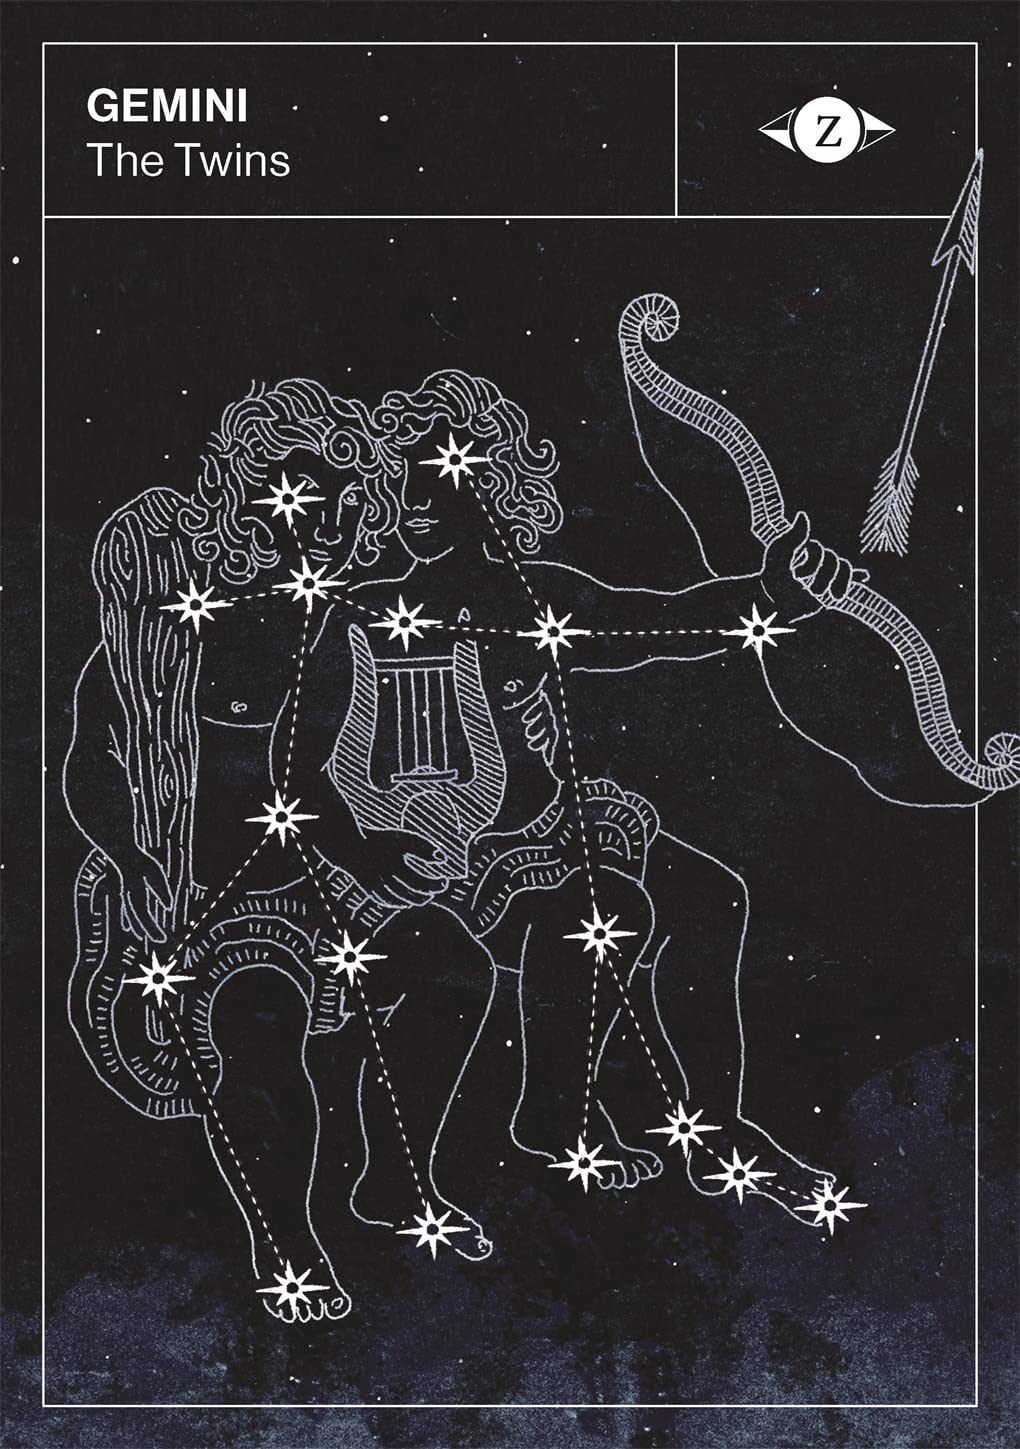 Deck of Stars: A Guide to the Night Sky